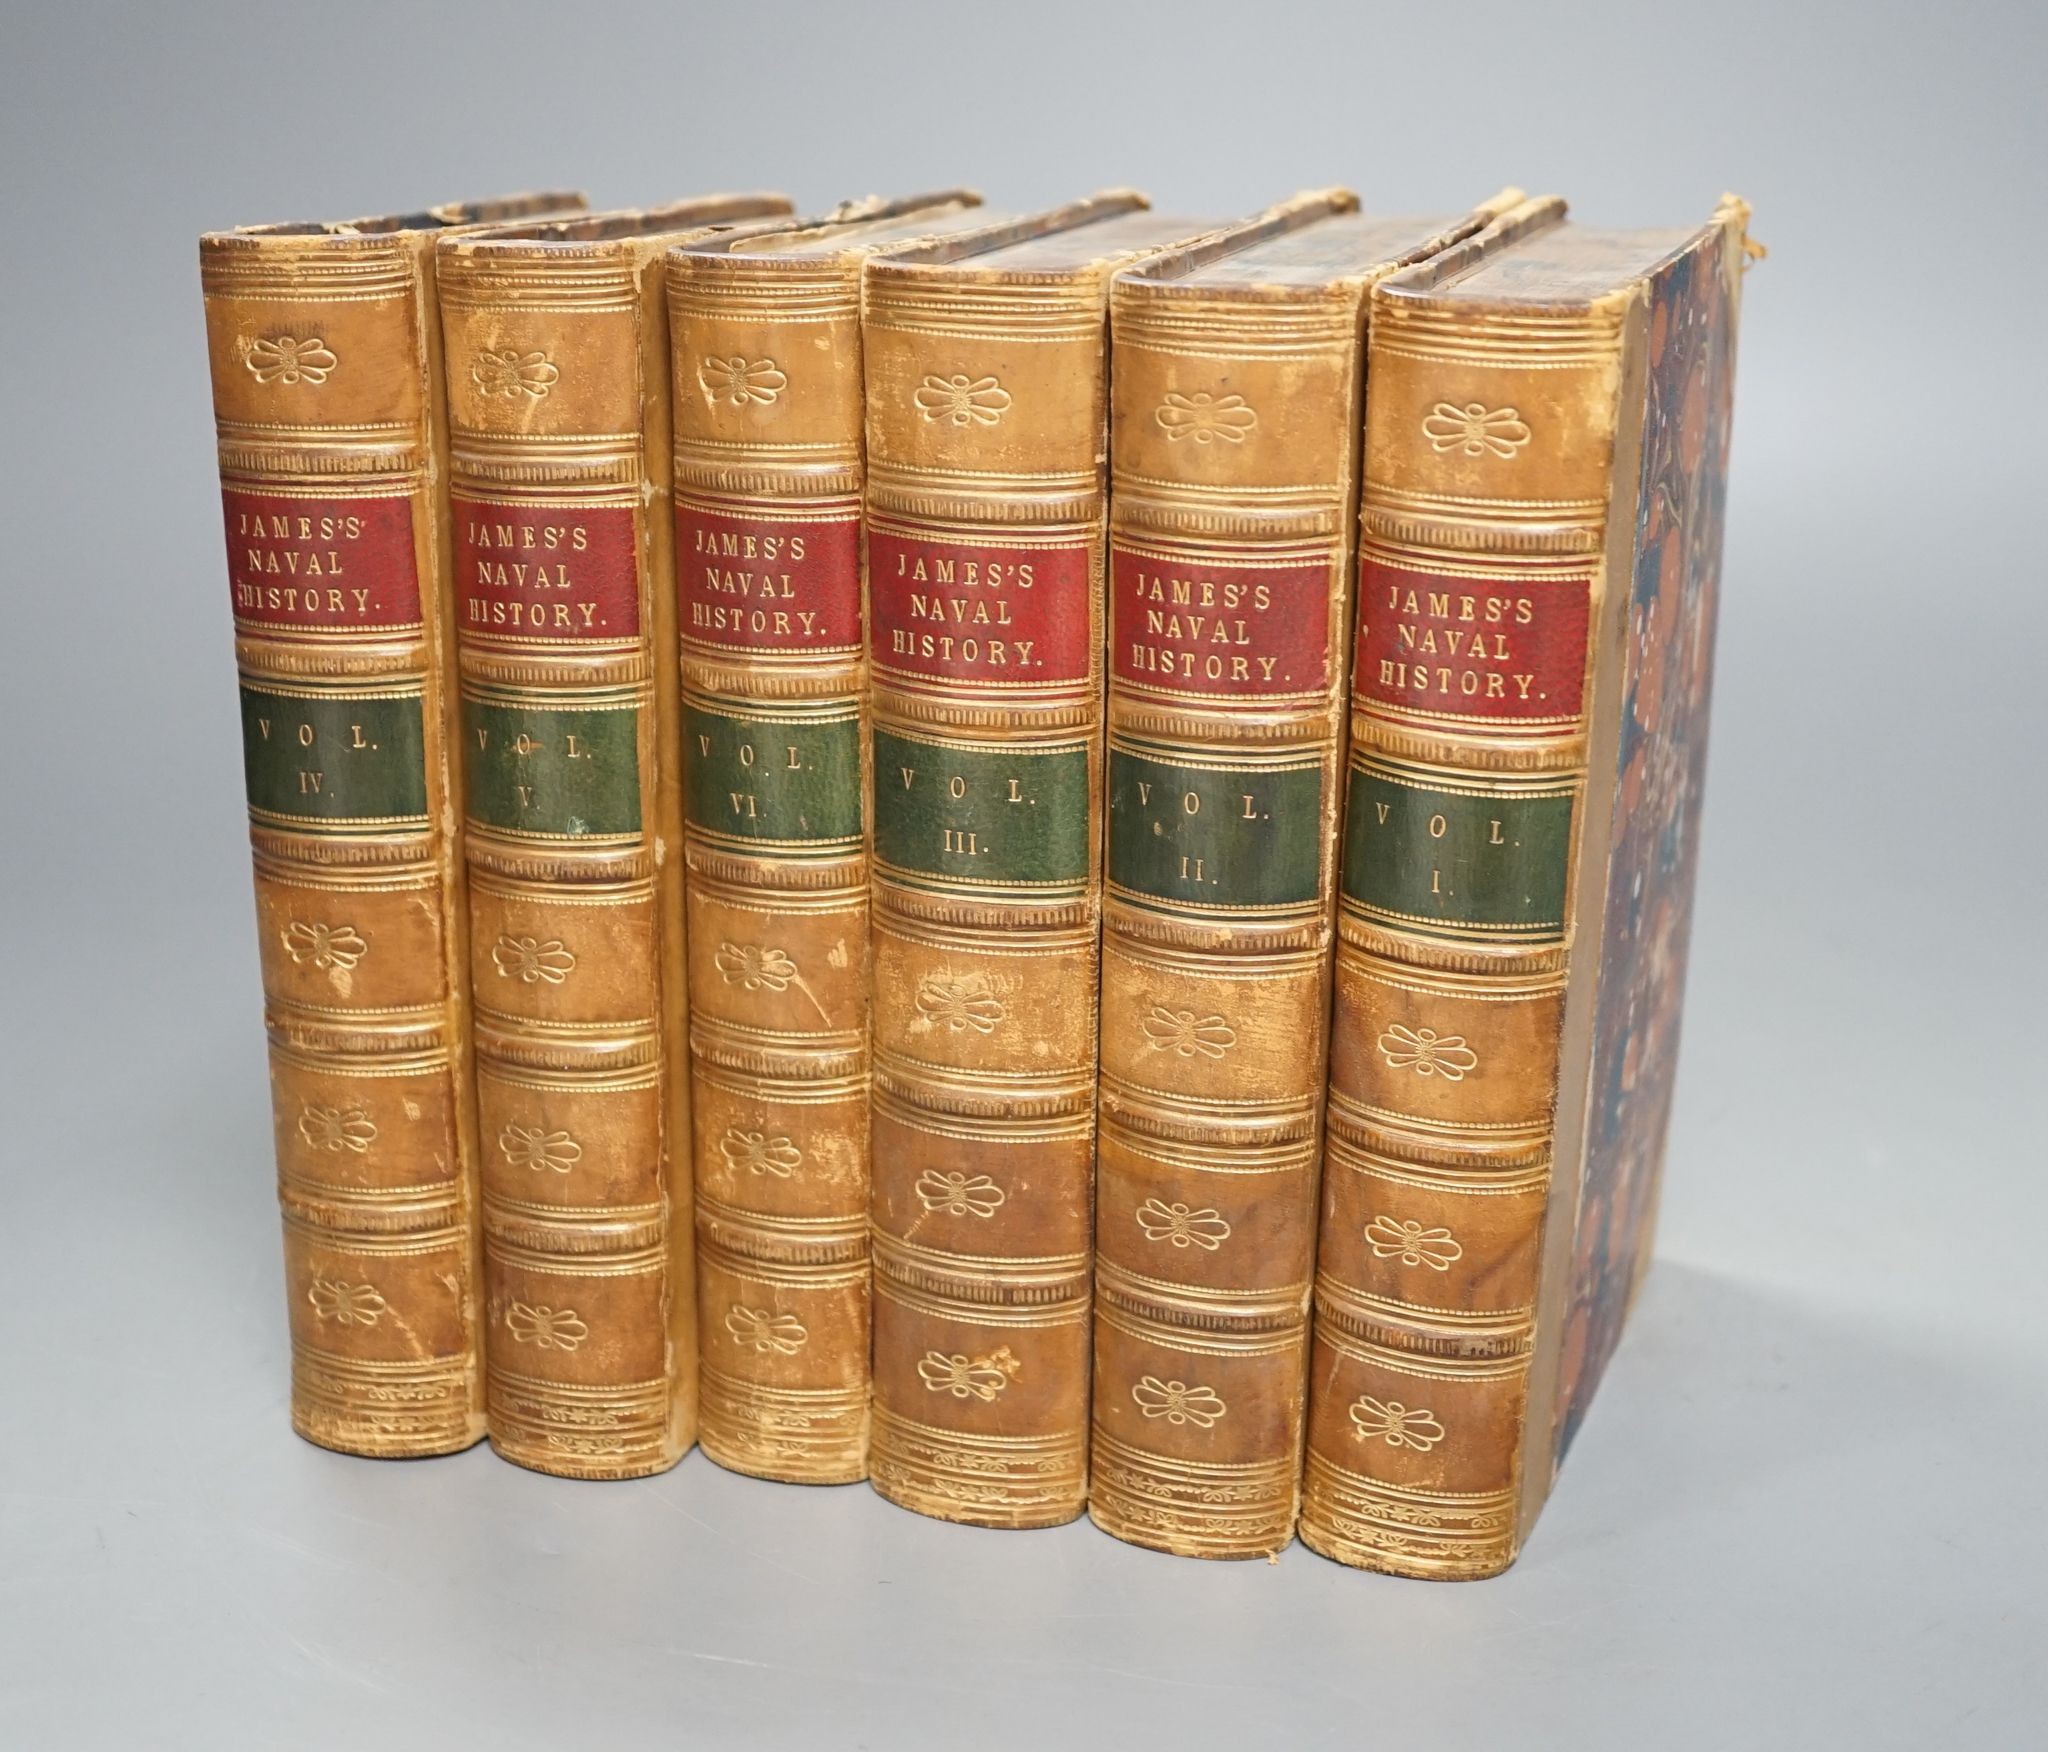 James, William - The Naval History of Great Britain ... new edition, with additions and notes, 6 vols. portrait frontispieces, 27 folded tables, text diagrams, contemp. half calf and marbled